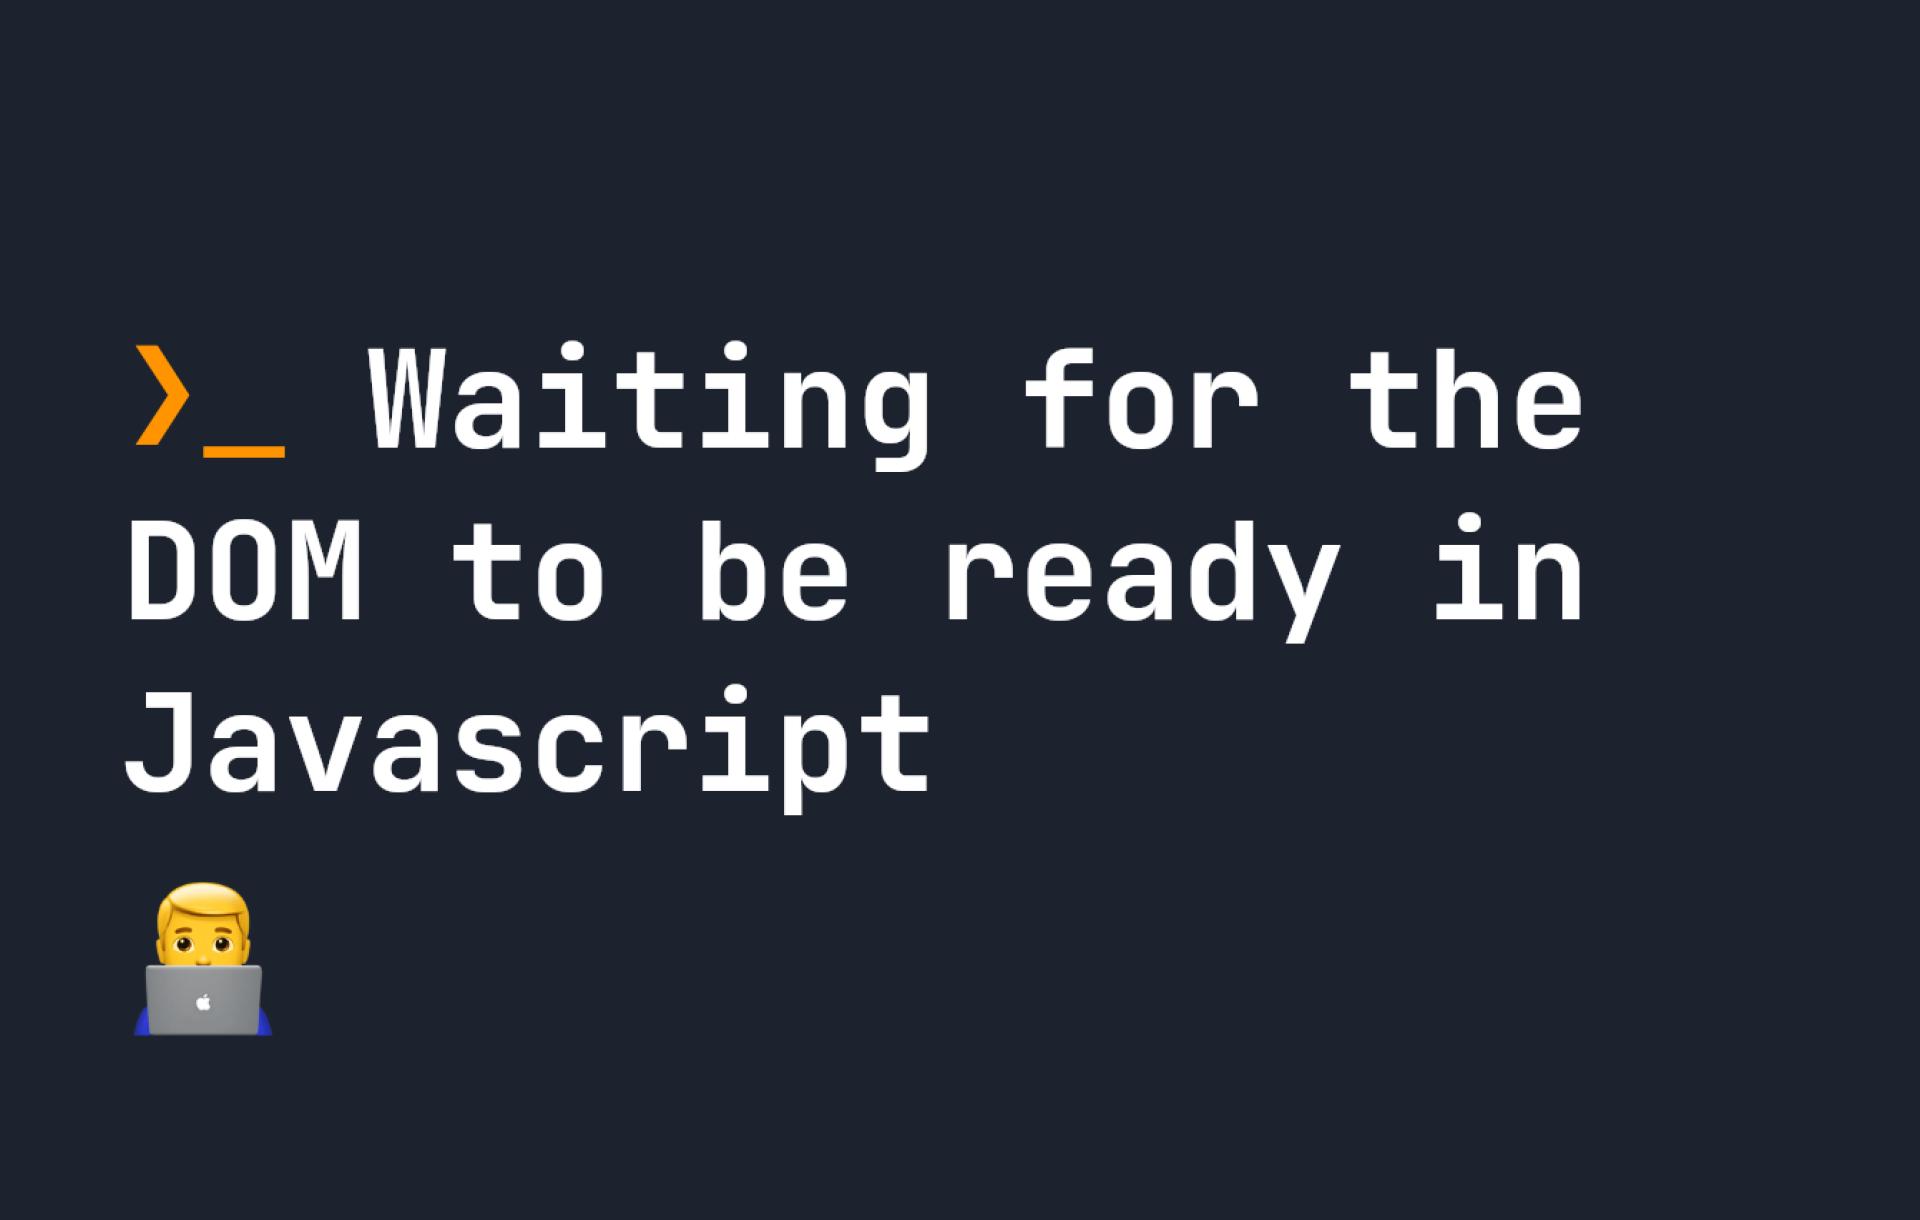 Waiting for the DOM to be ready in Javascript